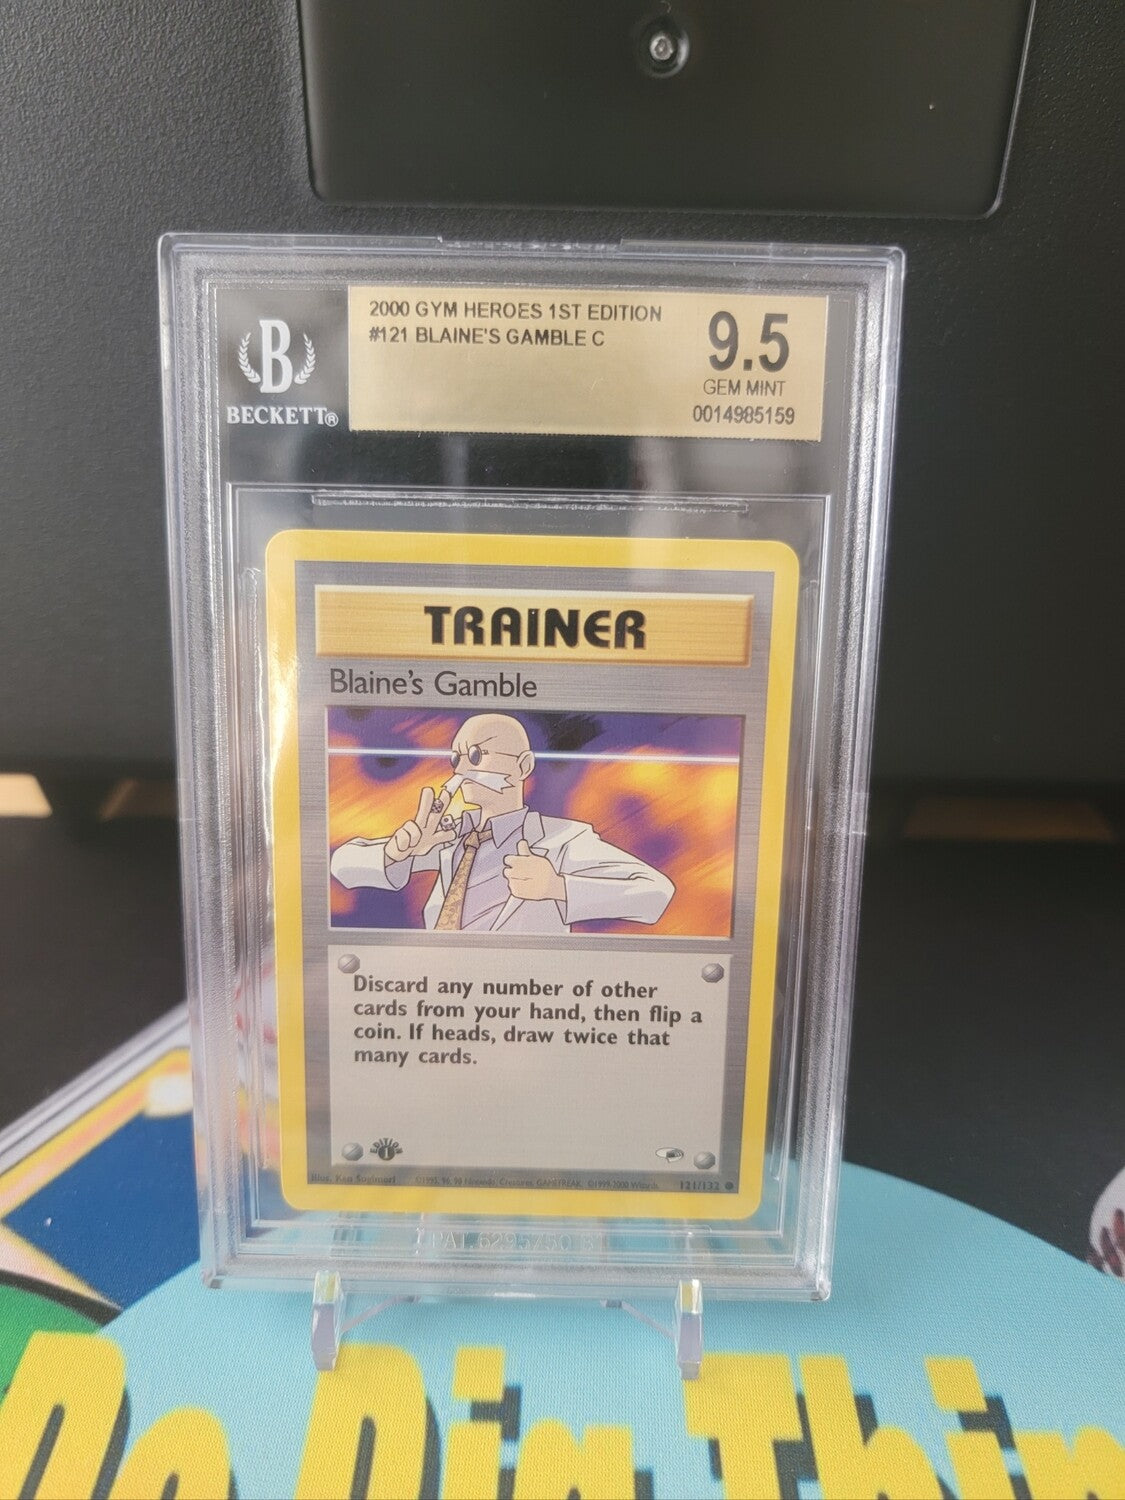 1st Edition Gym Heroes Blaine's Gamble BGS 9.5